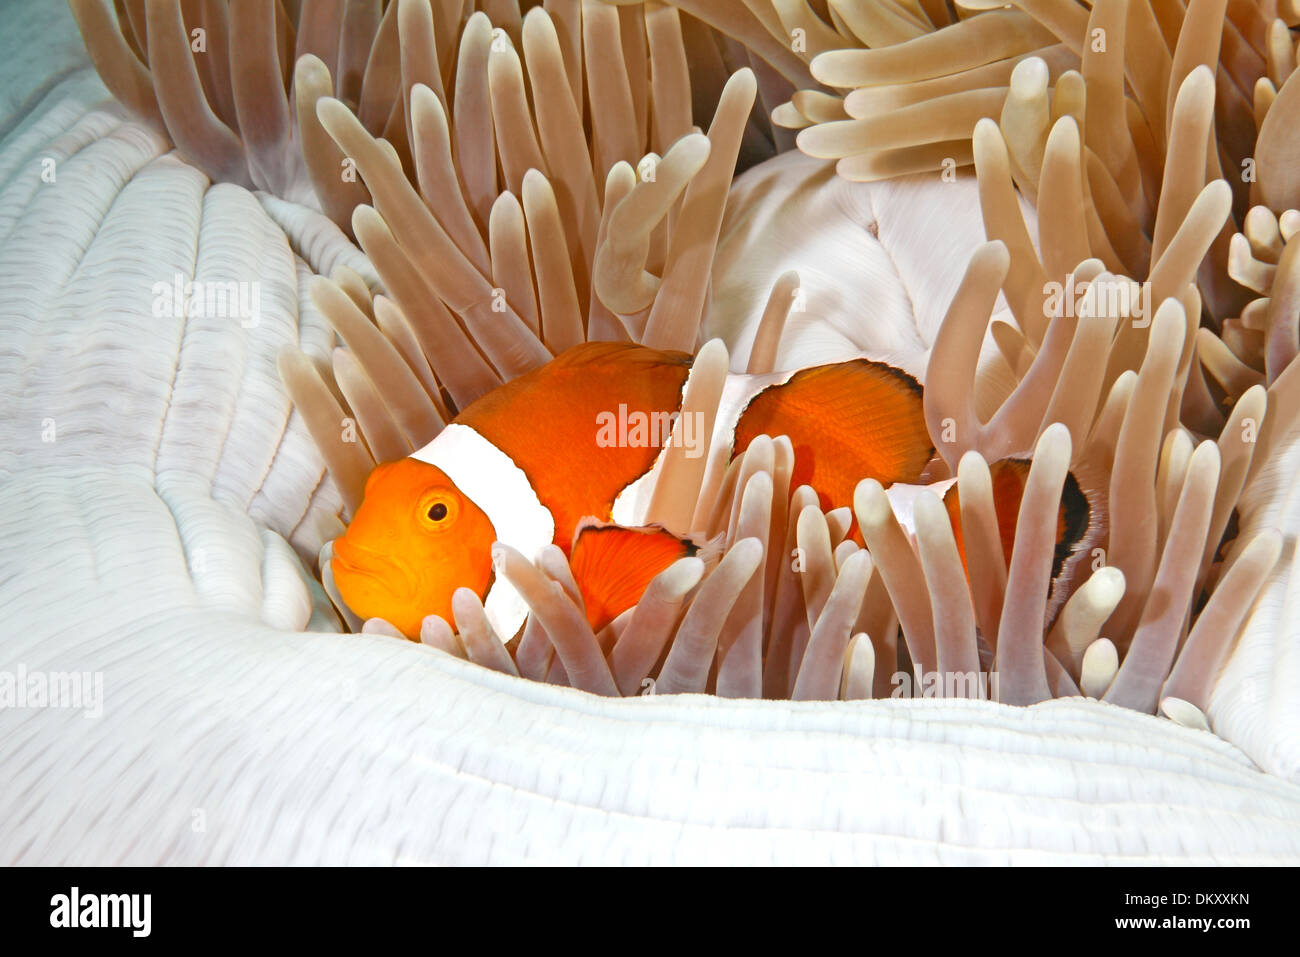 Clown Anemonefish, Amphiprion ocellaris, sheltering among the tentacles of its anemone home Stock Photo